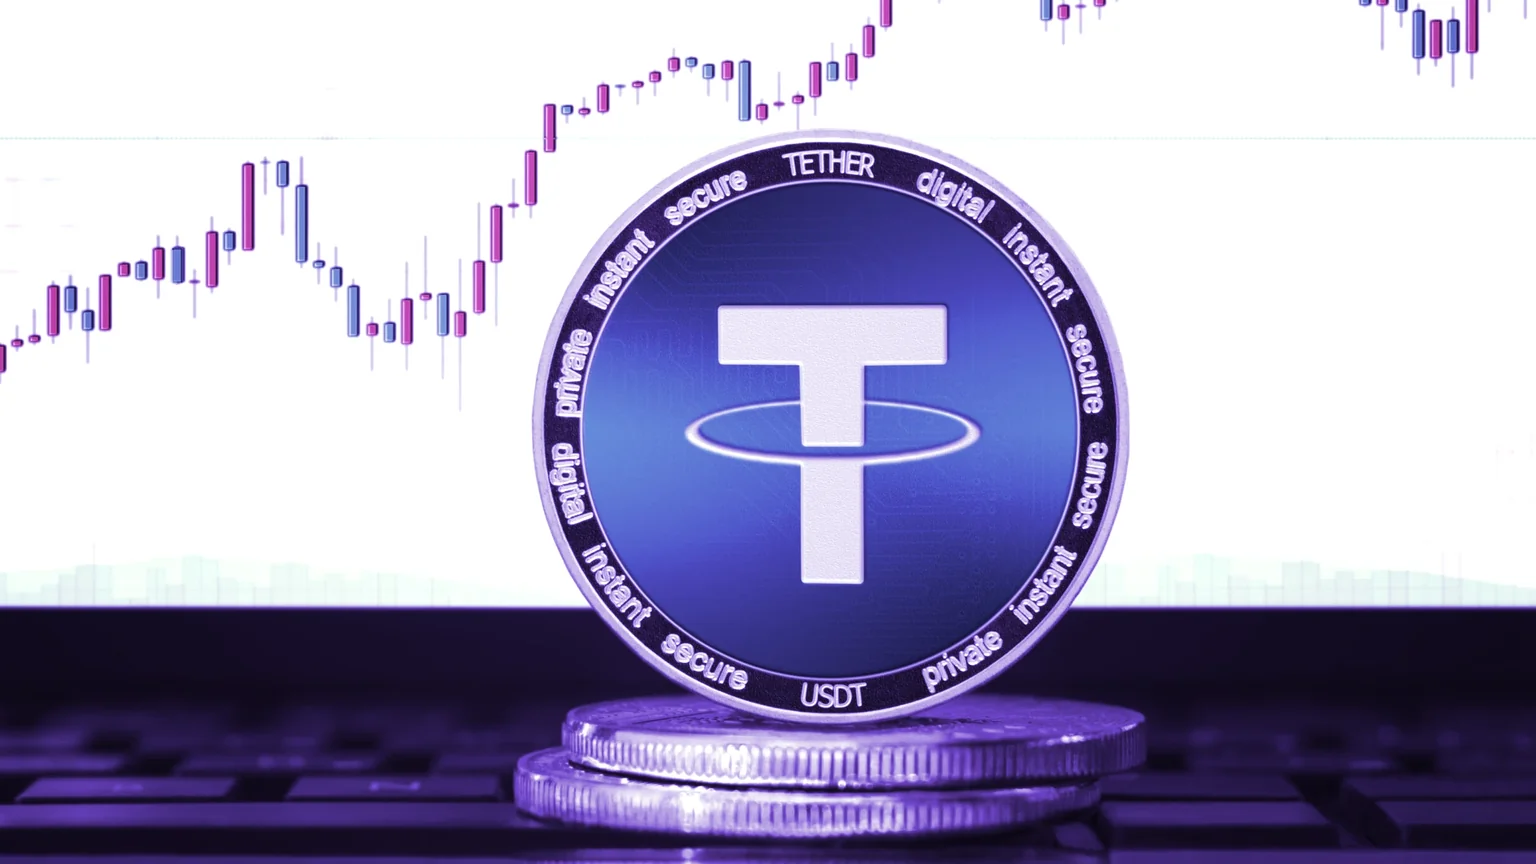 Tether dominates the stablecoin market. Image: Shutterstock